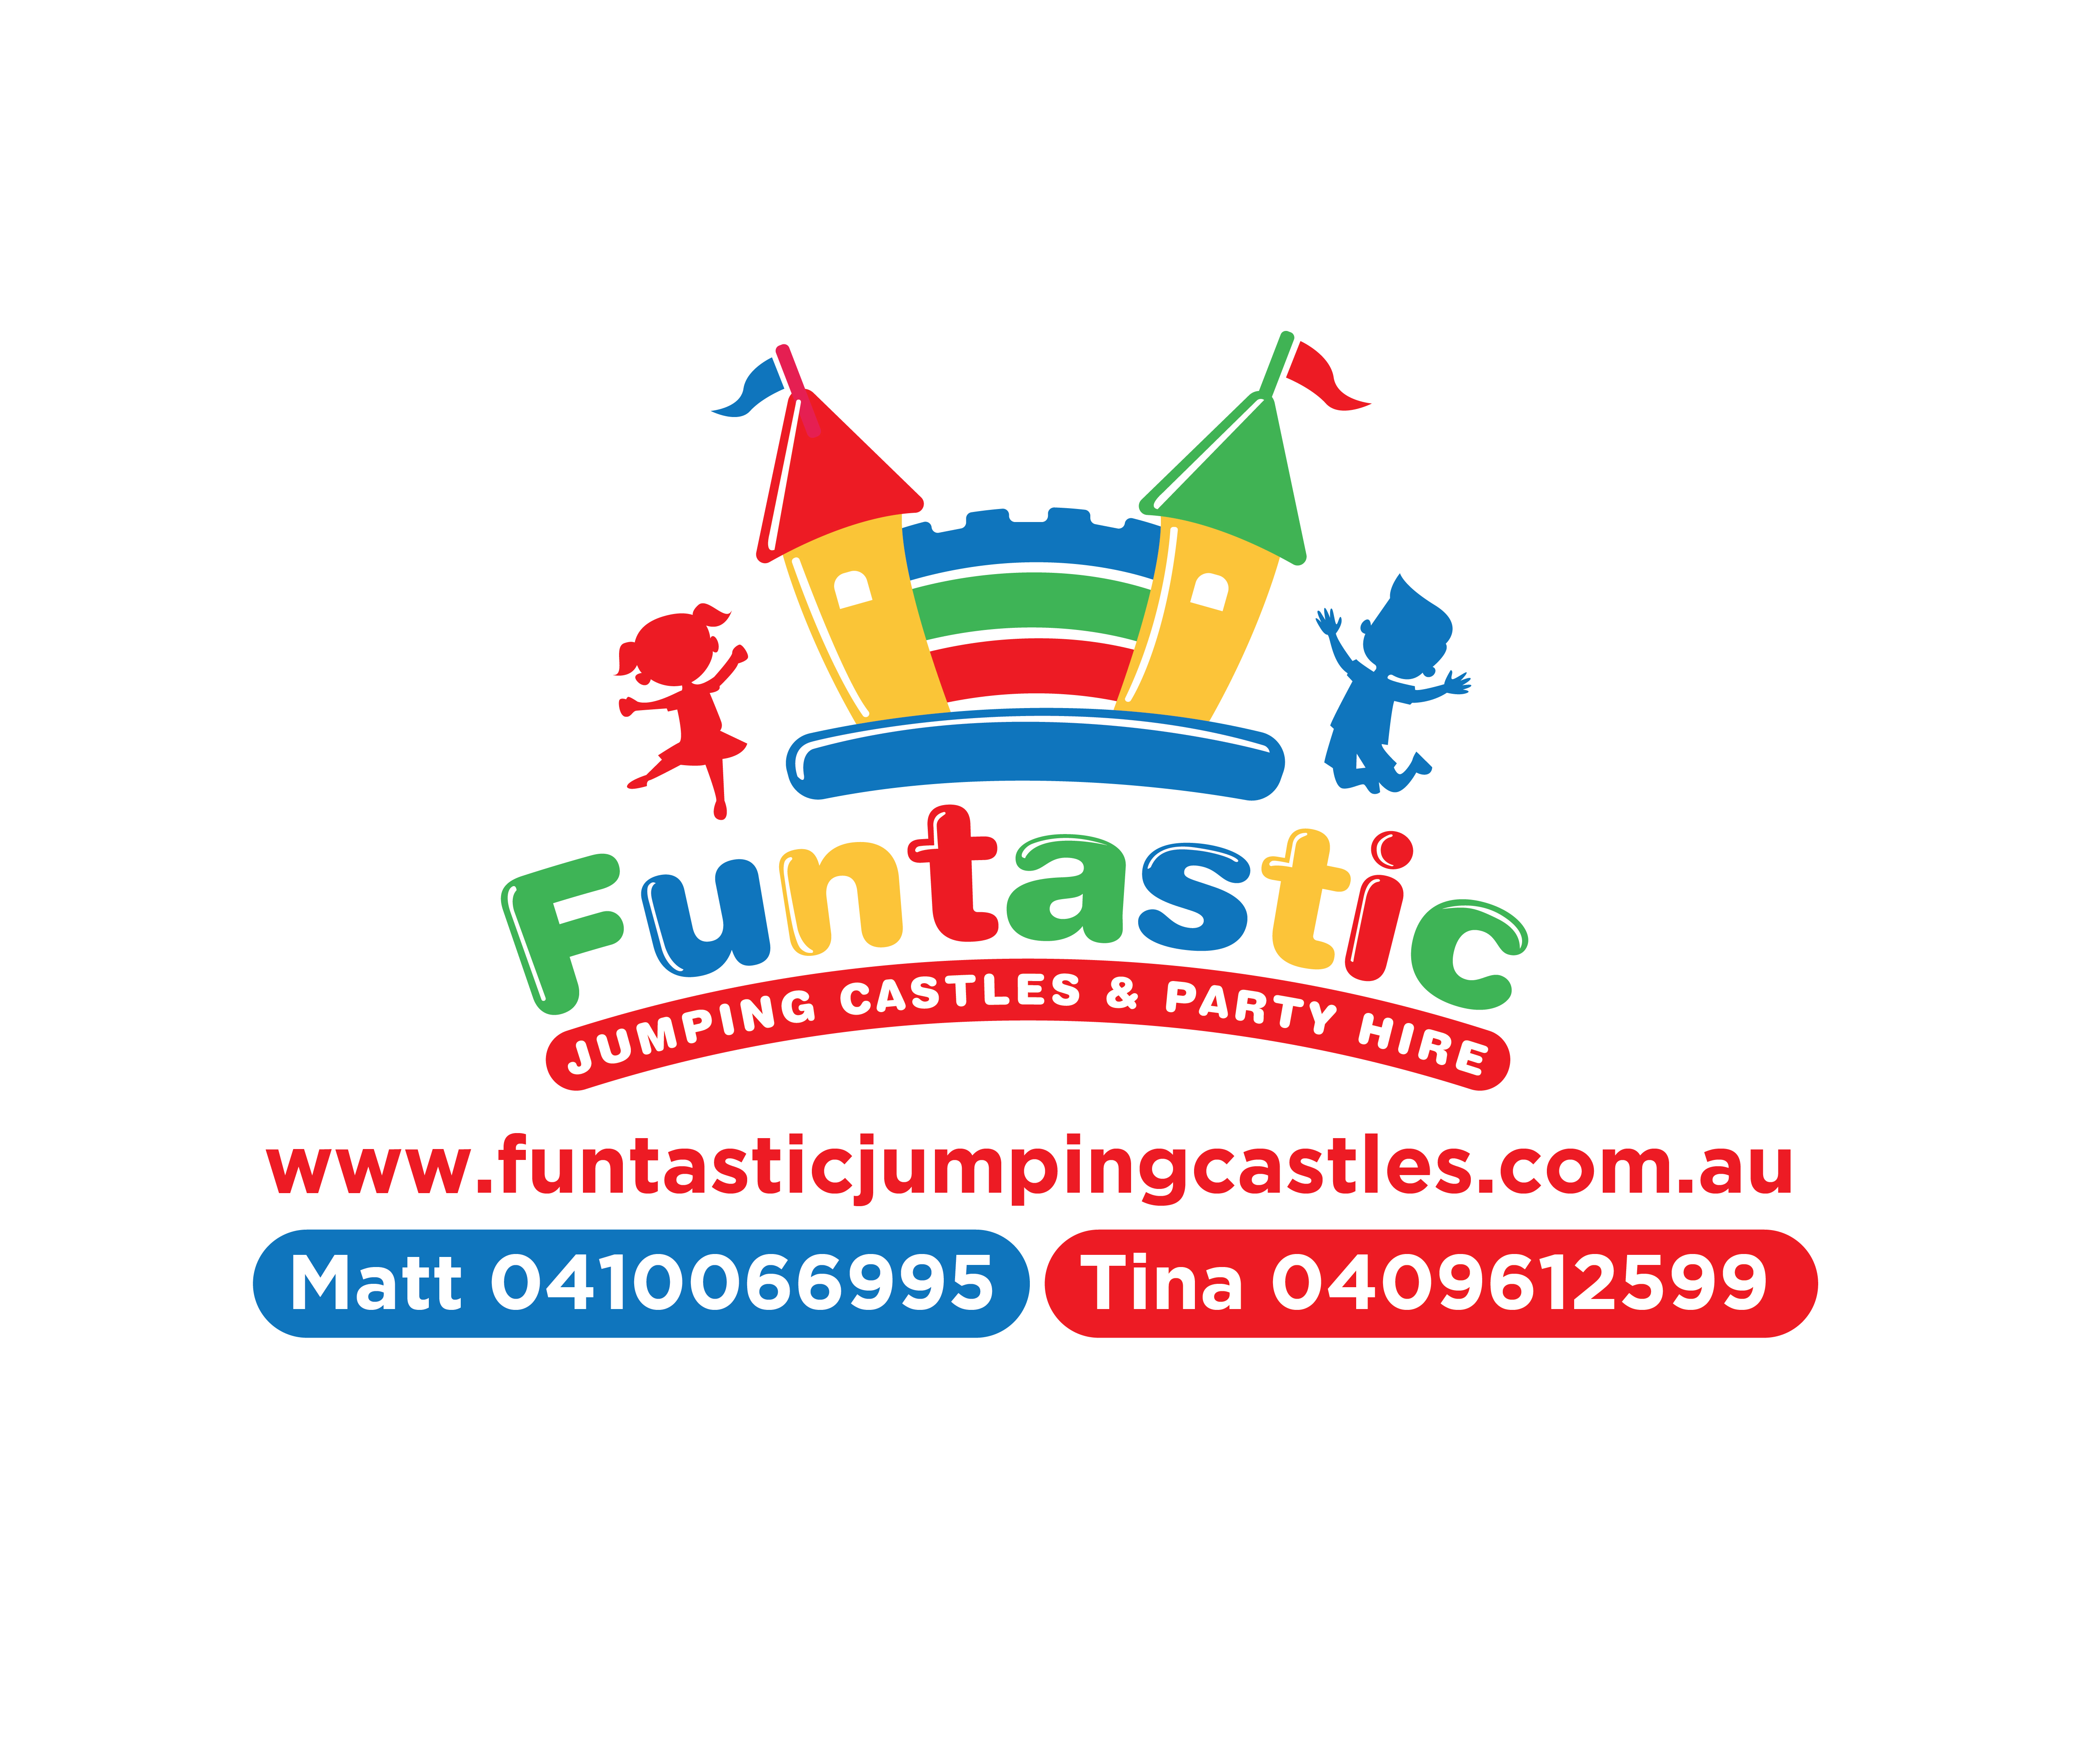 Funtastic Jumping Castles & Party Hire